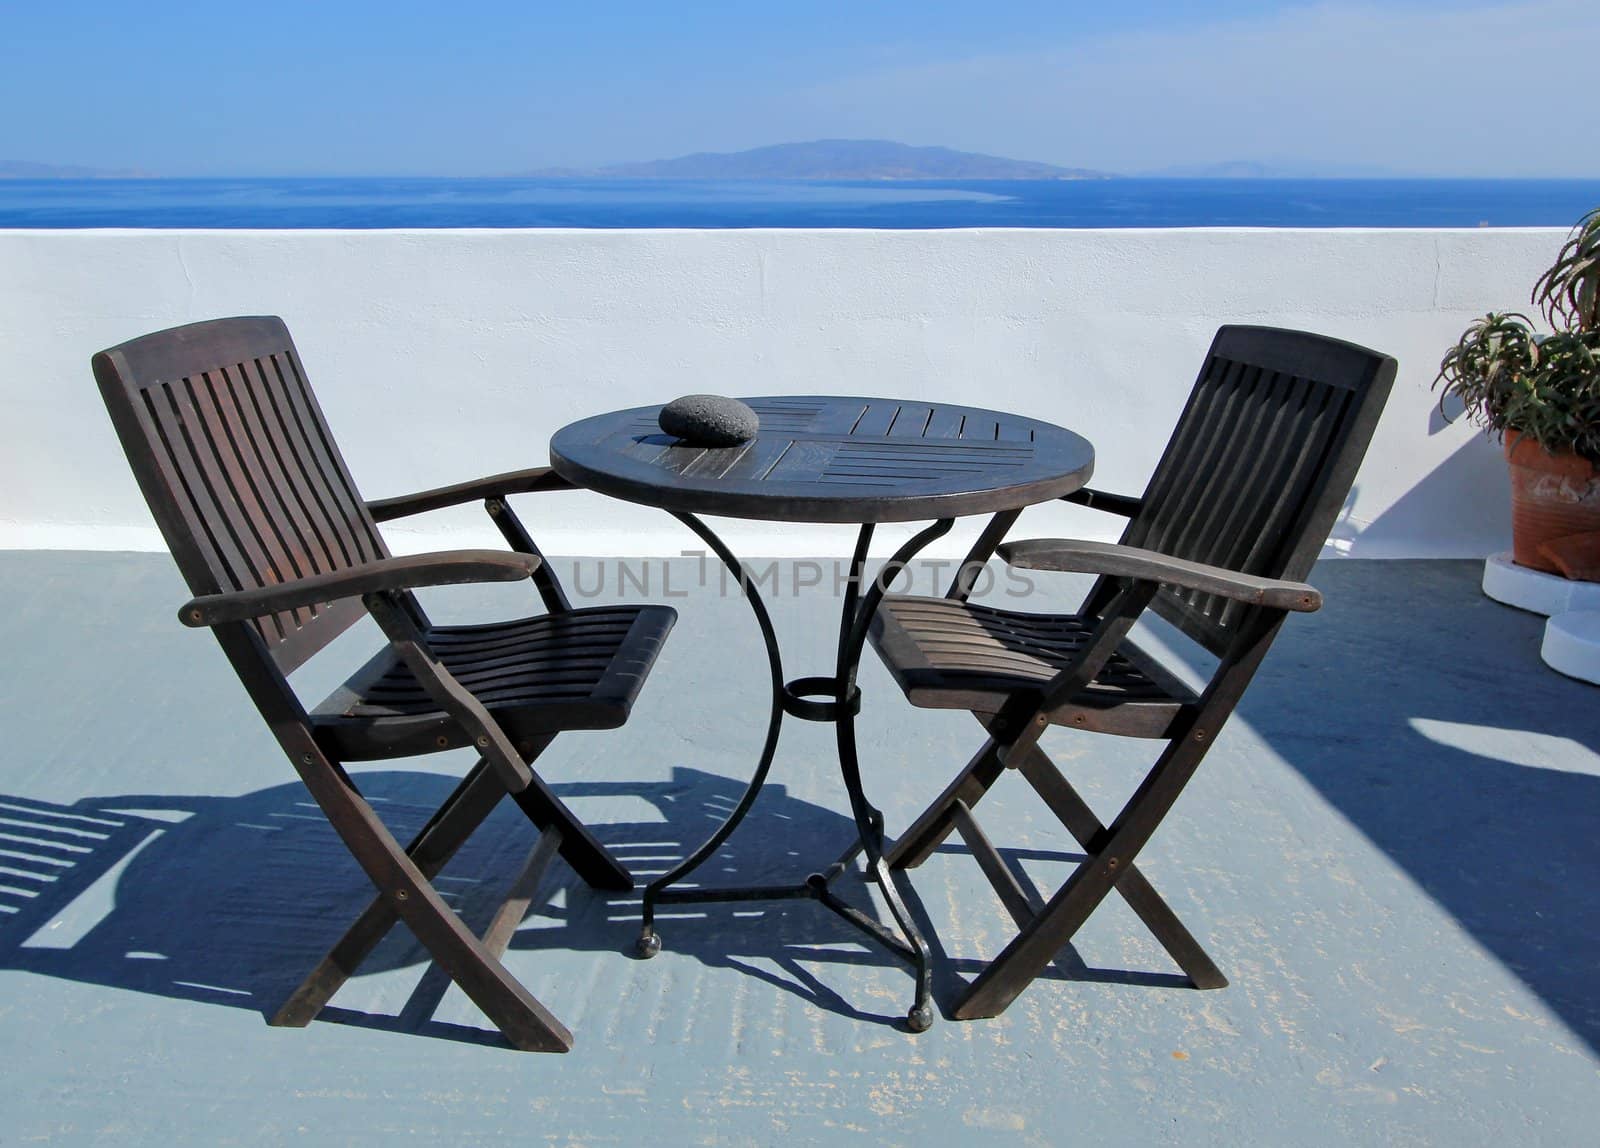 View on islands and Aegean sea from a balcony with tow black chairs and table made of wood at Oia, Santorini island, Greece